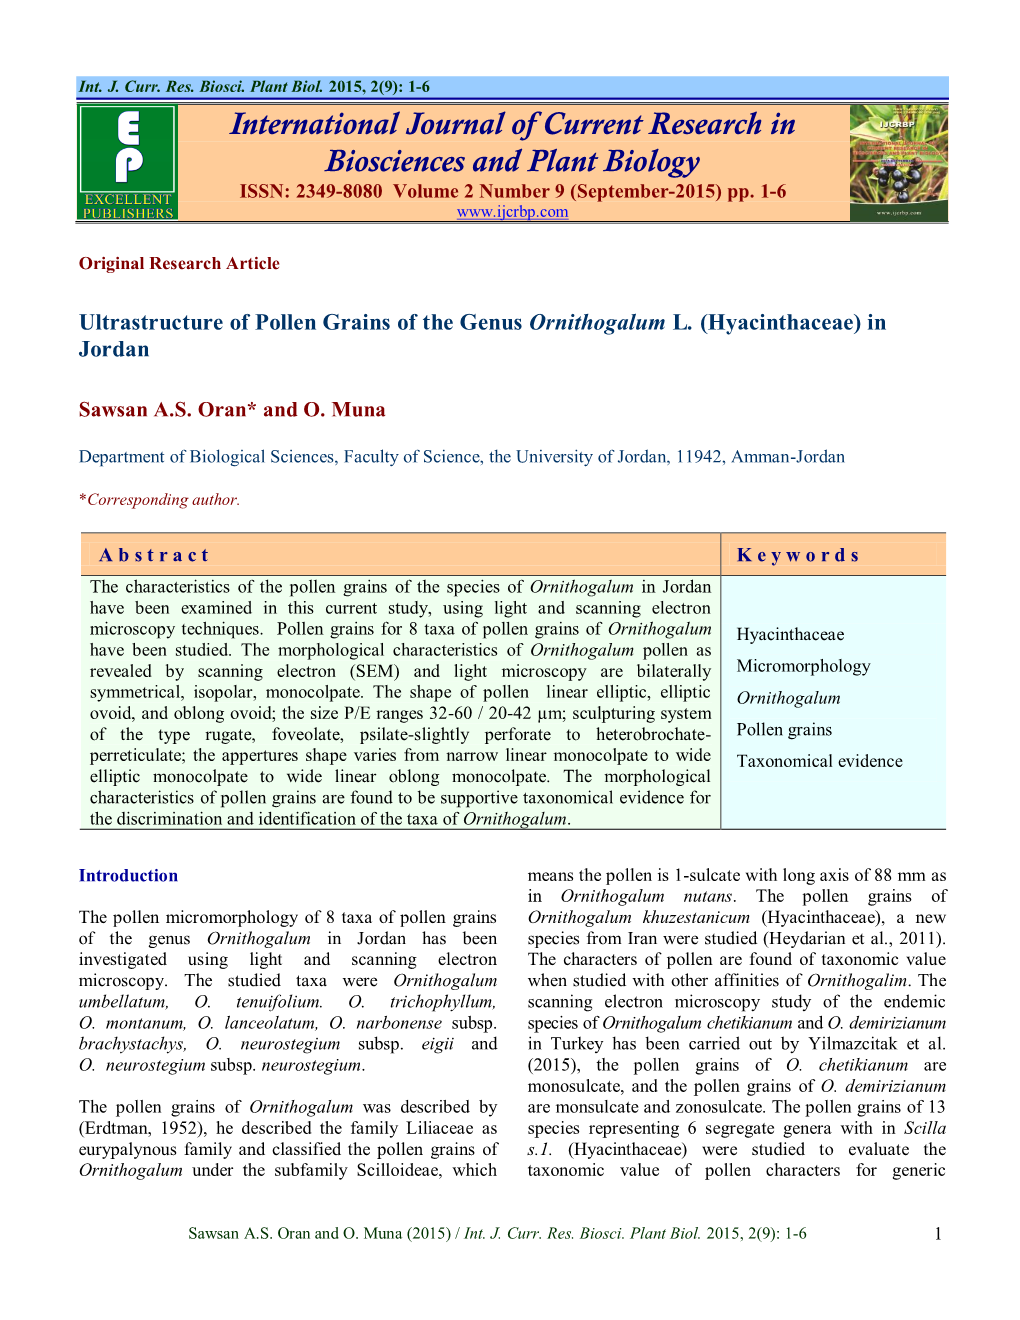 International Journal of Current Research in Biosciences and Plant Biology ISSN: 2349-8080 Volume 2 Number 9 (September-2015) Pp